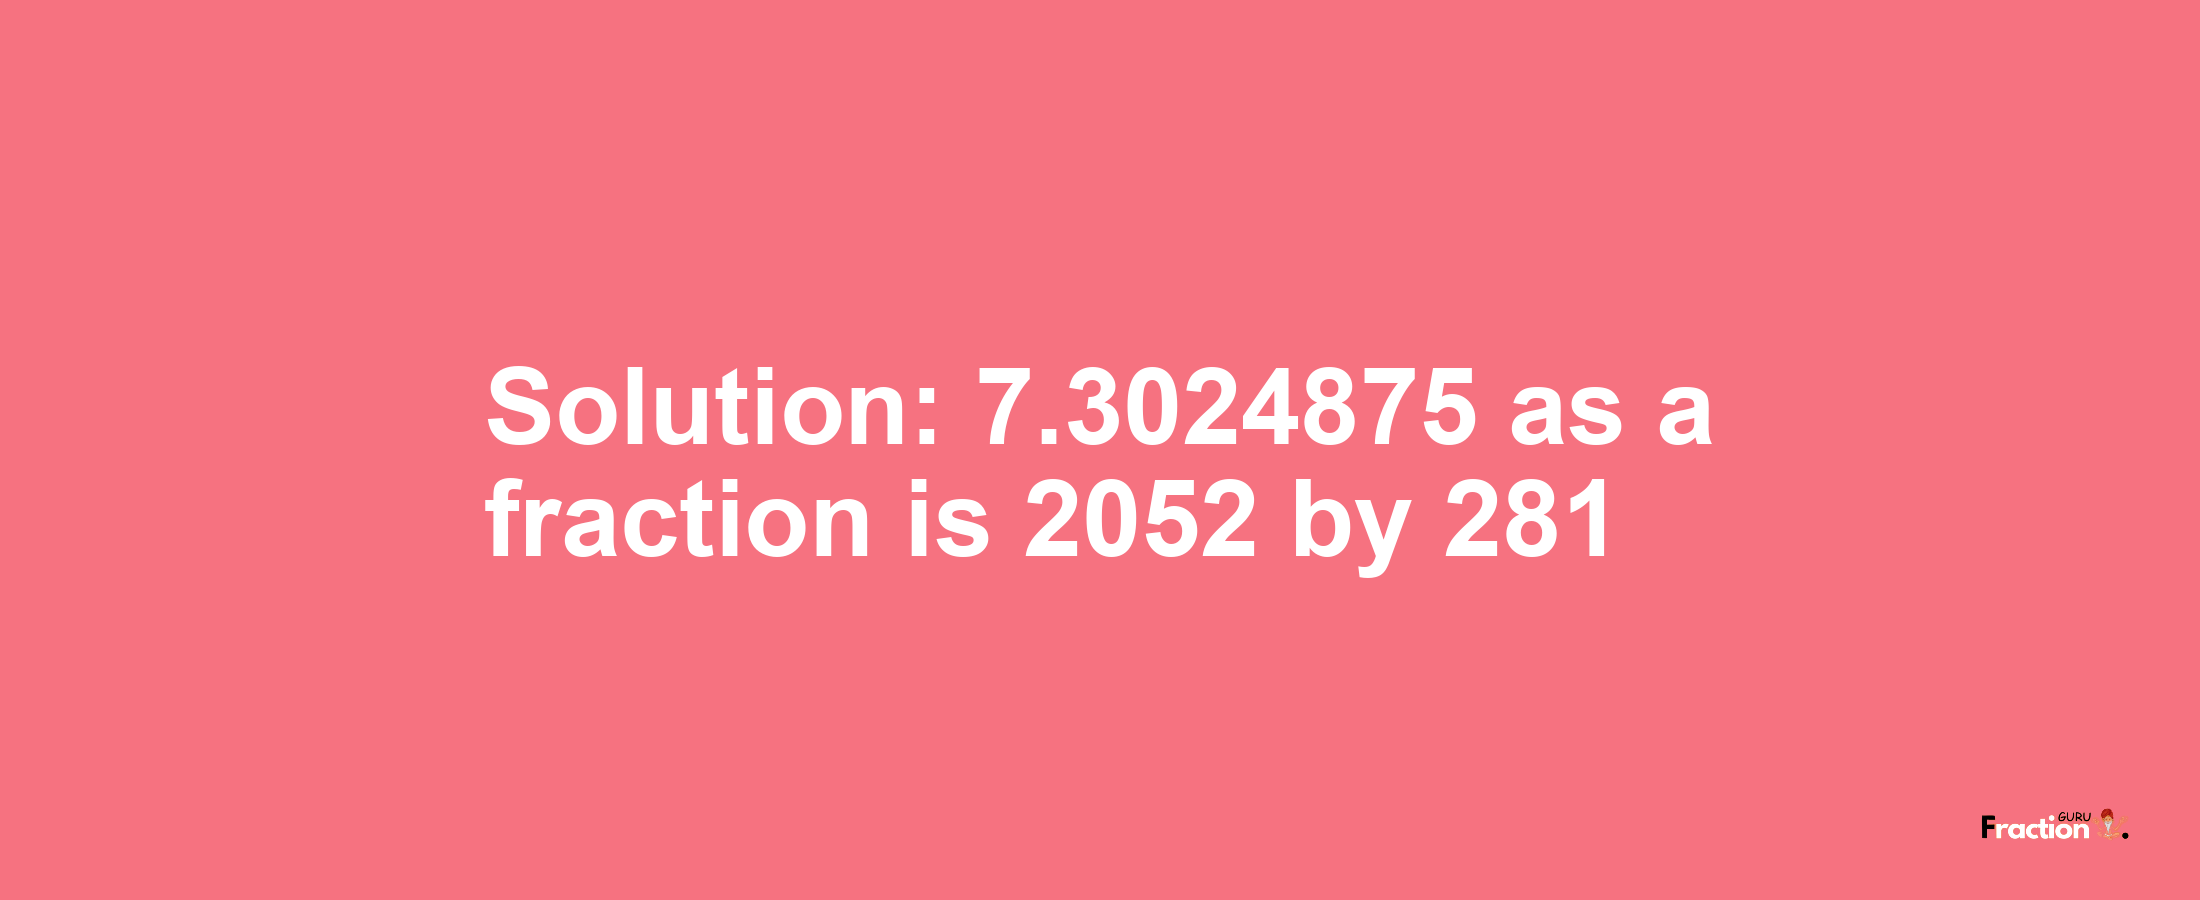 Solution:7.3024875 as a fraction is 2052/281